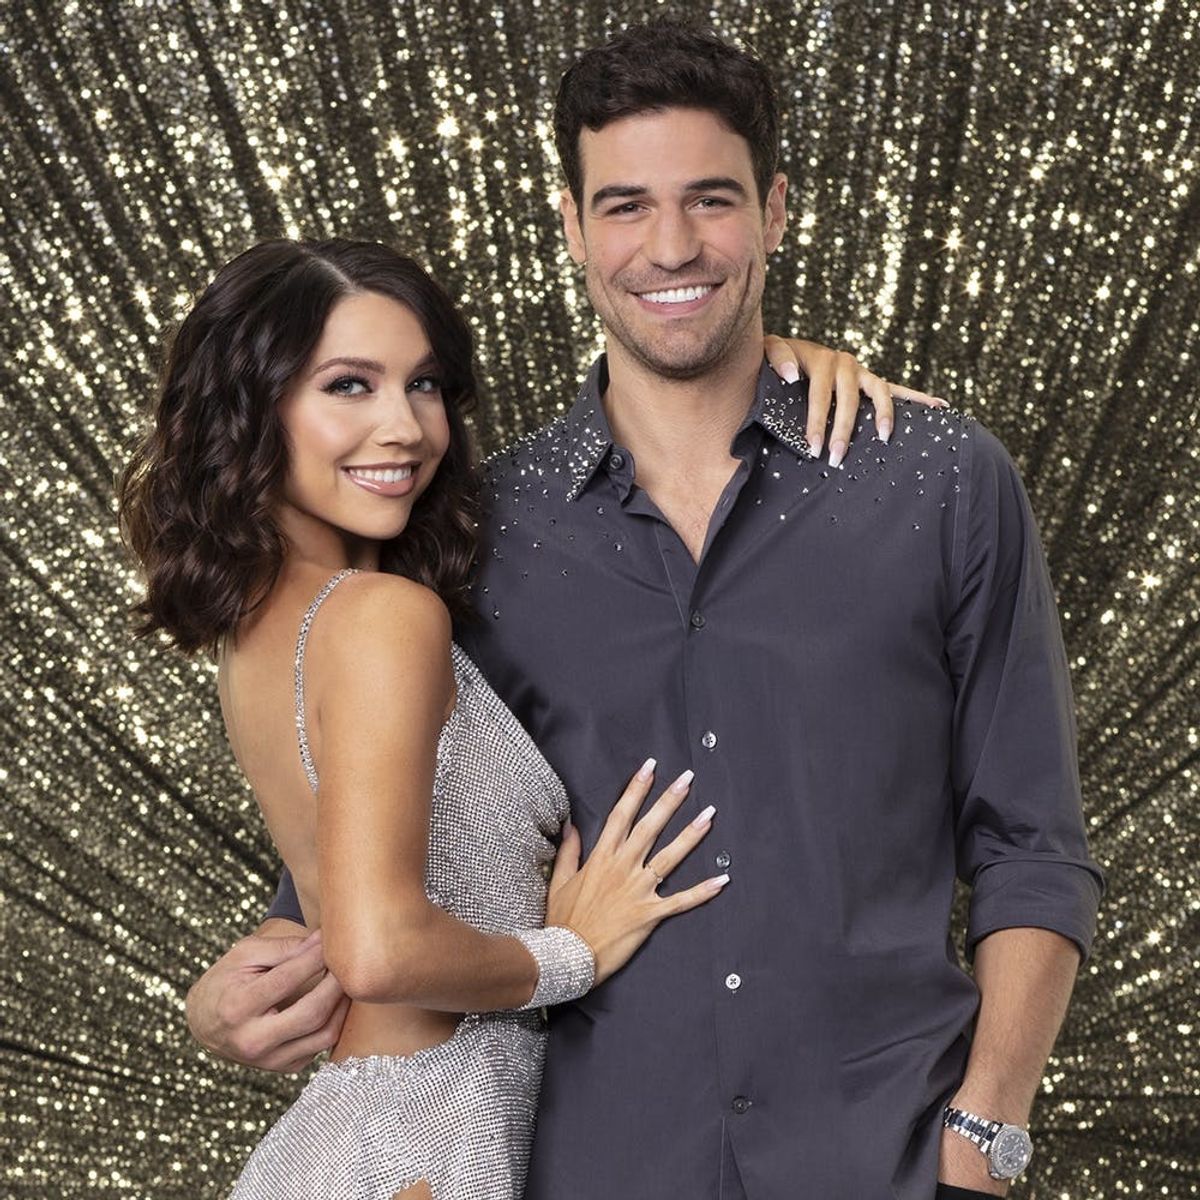 Meet the ‘Dancing With the Stars’ Season 27 Cast!